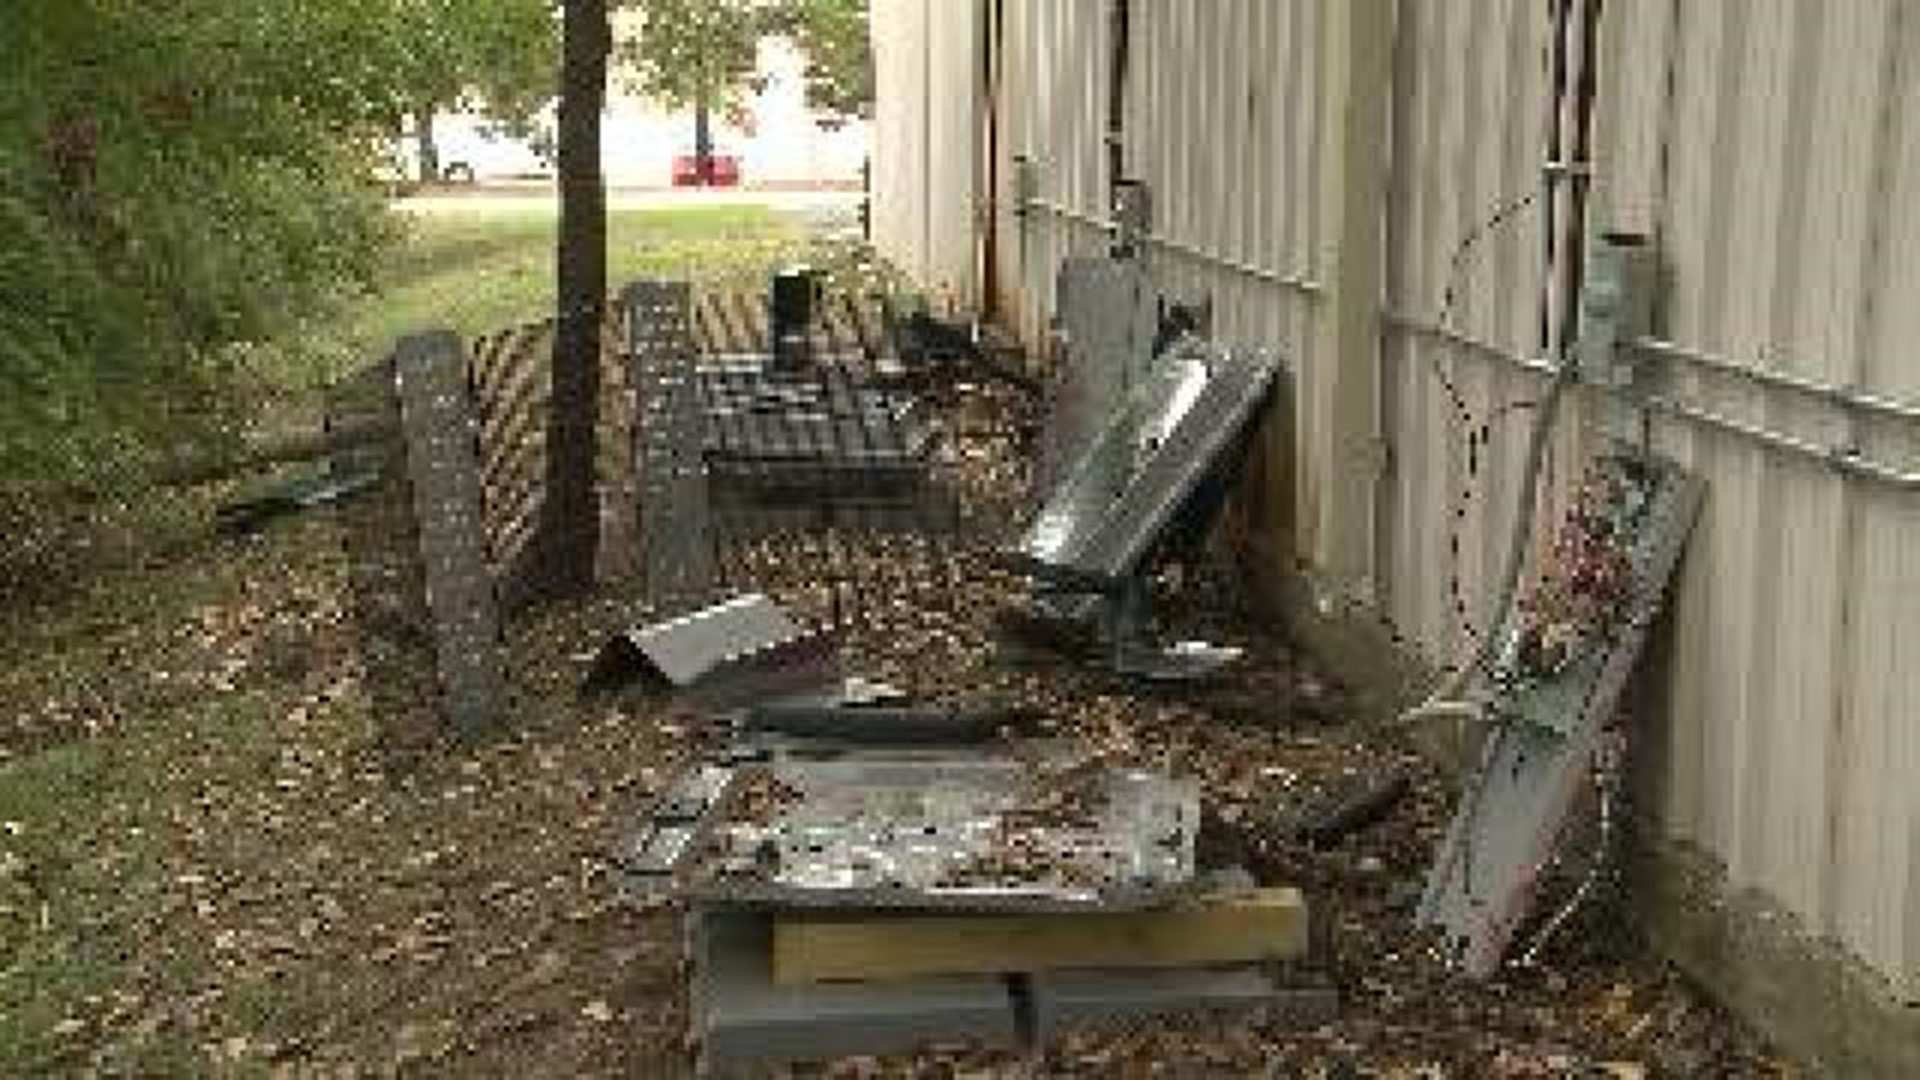 AC Units Stolen, Equipment Damaged at Clearinghouse